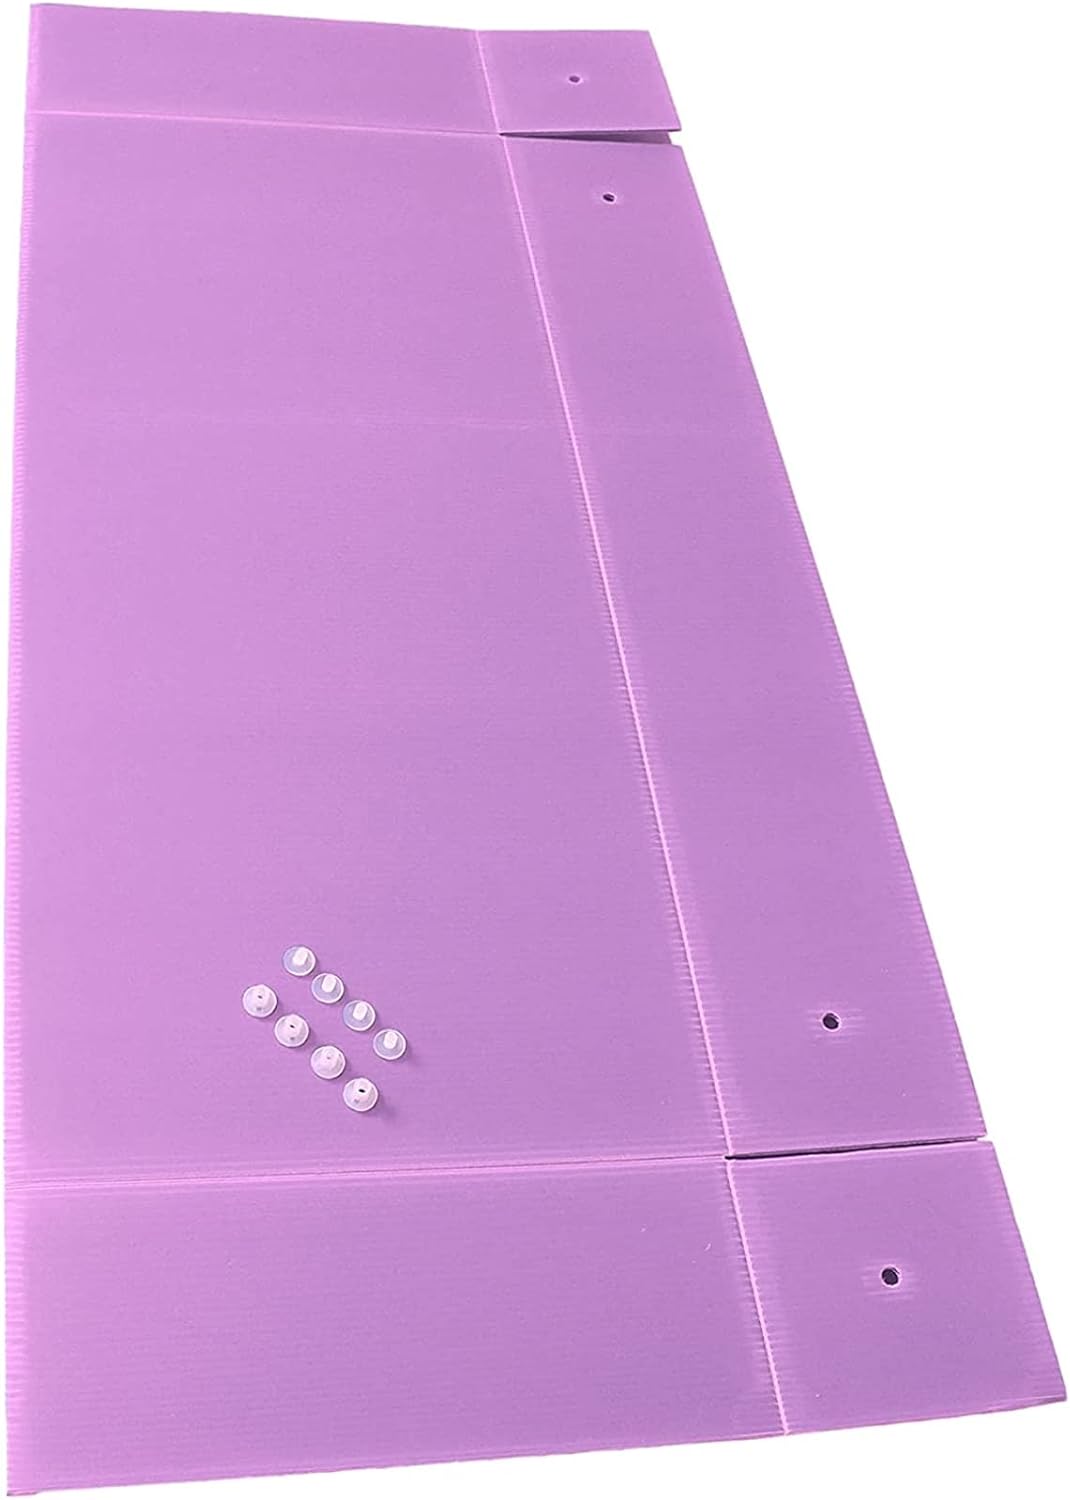 Midlee Guinea Pig Corrugated Plastic Cage Liners - 2 x 3 Panel Size - Purple